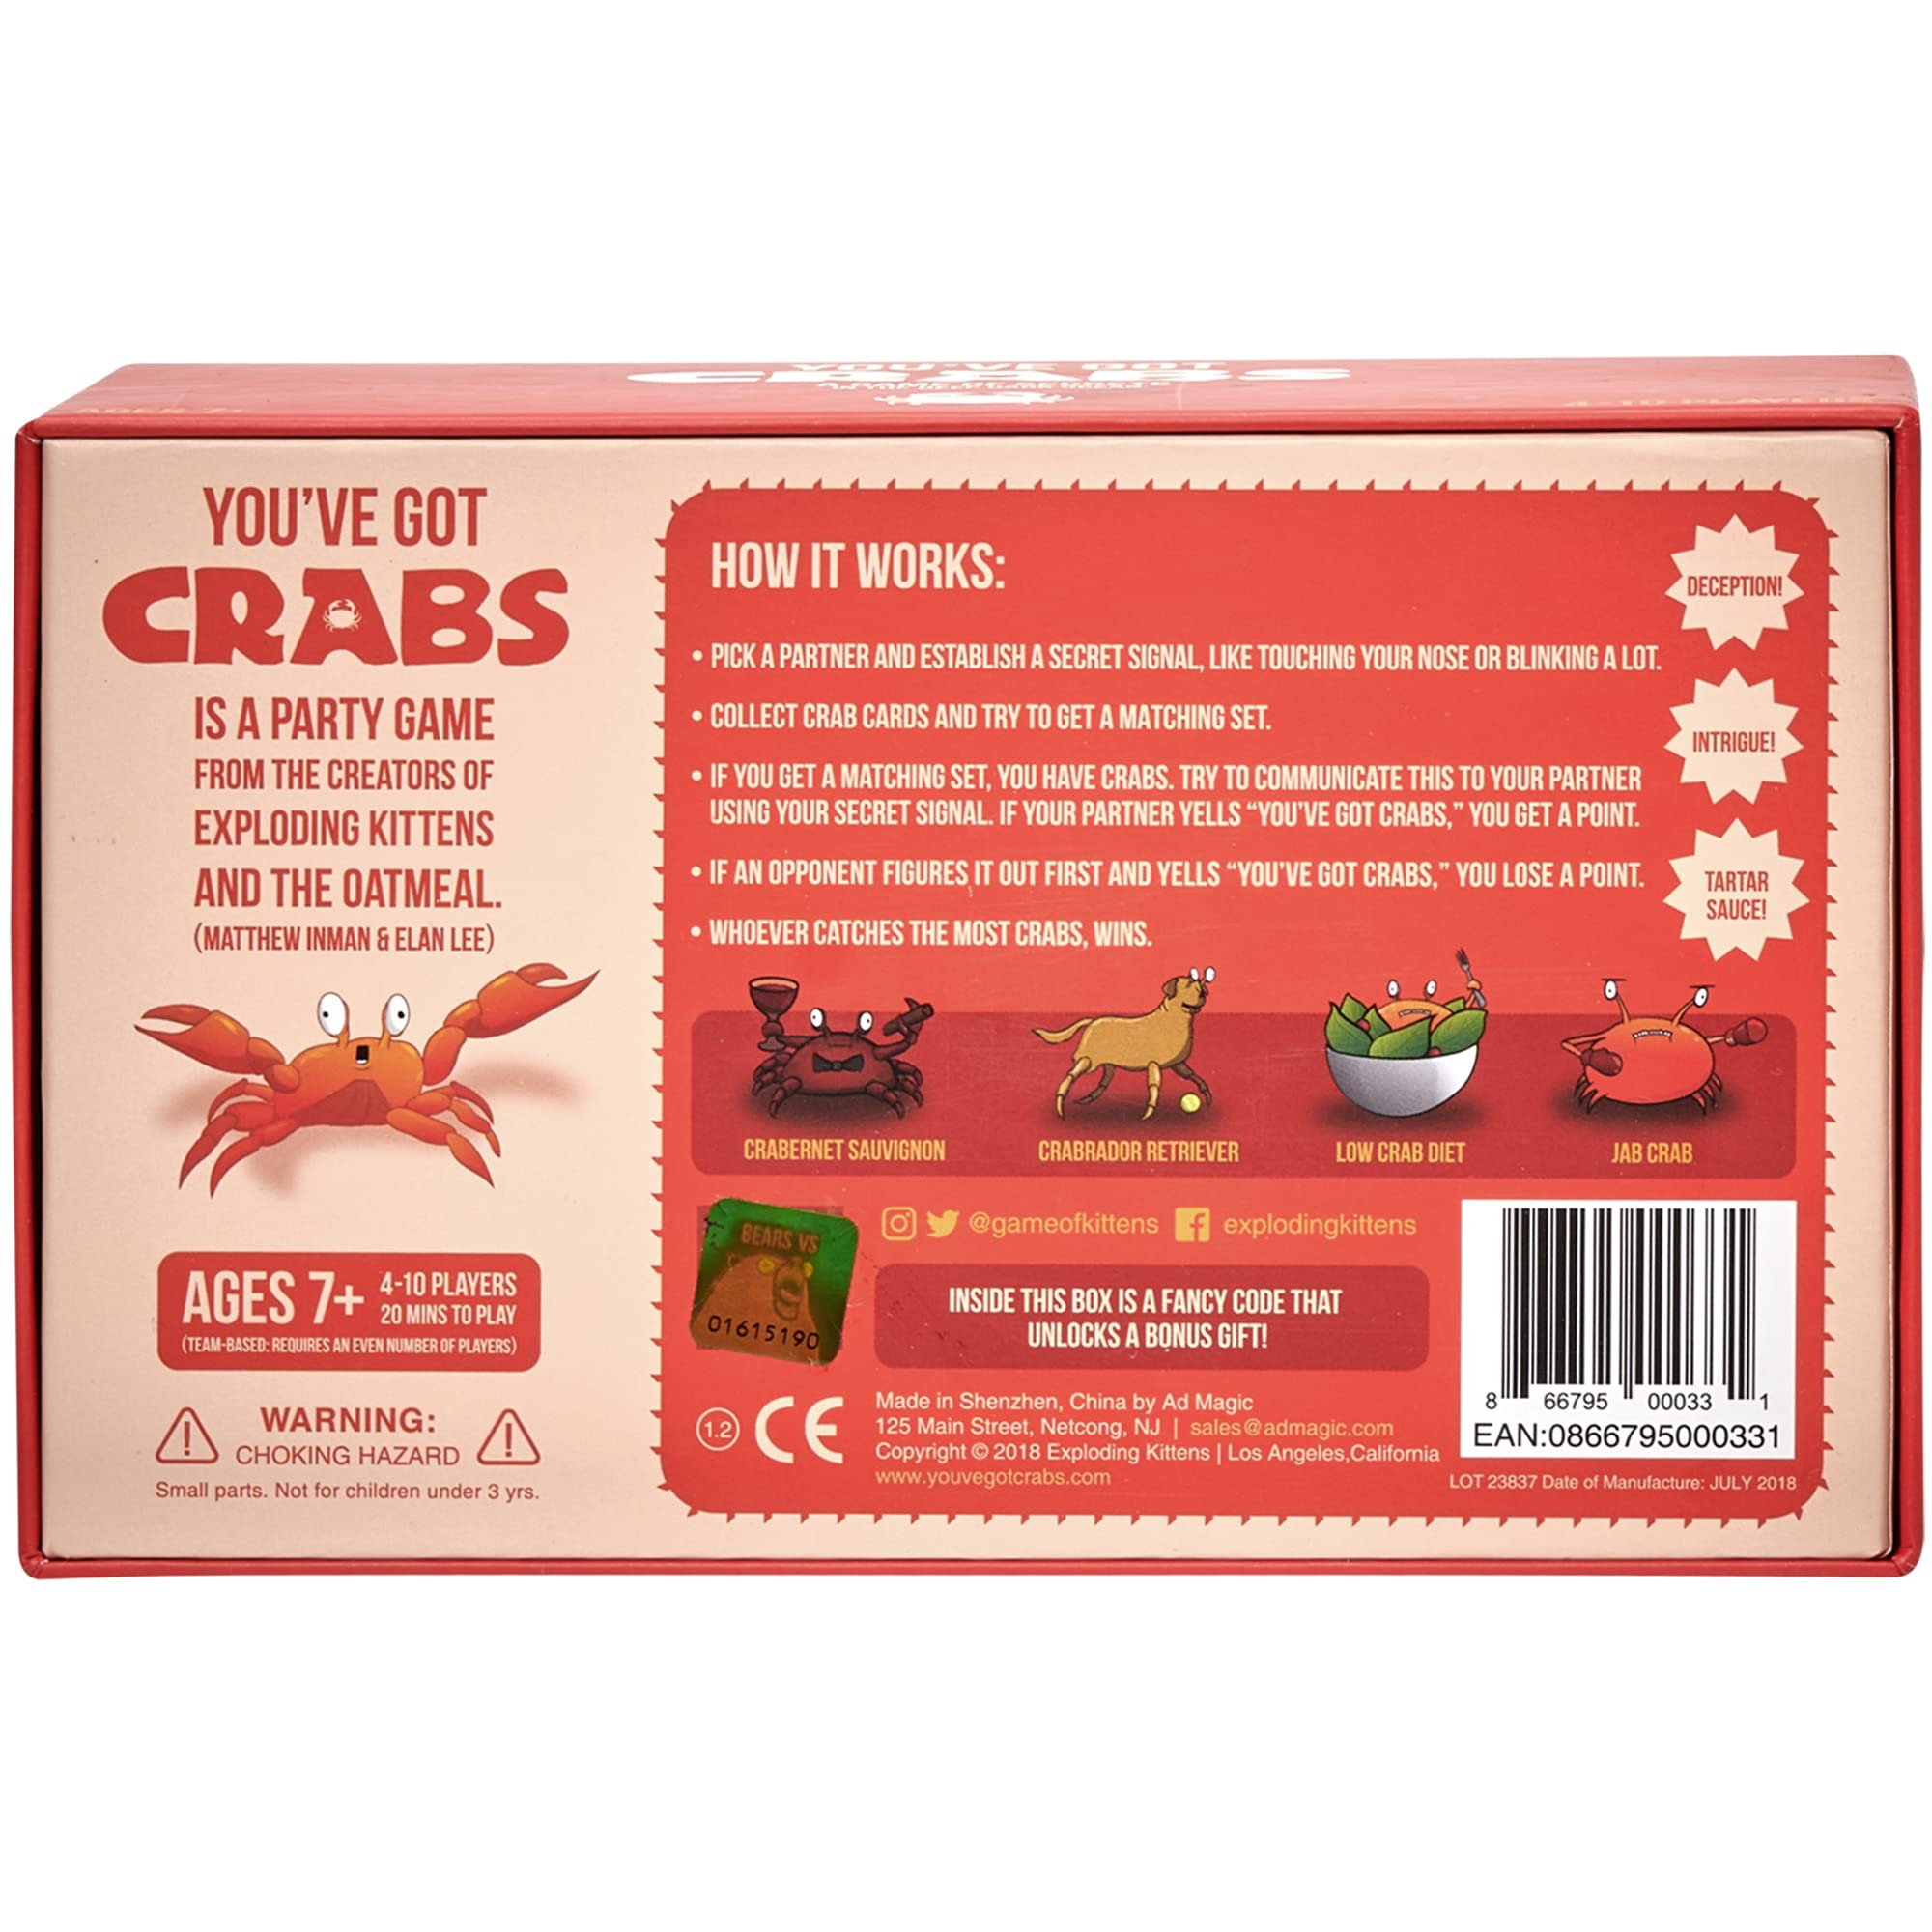 You've Got Crabs by Exploding Kittens - A Card Game Filled with Crustaceans and Secrets - Family-Friendly Party Games - Card Games For Adults, Teens & Kids